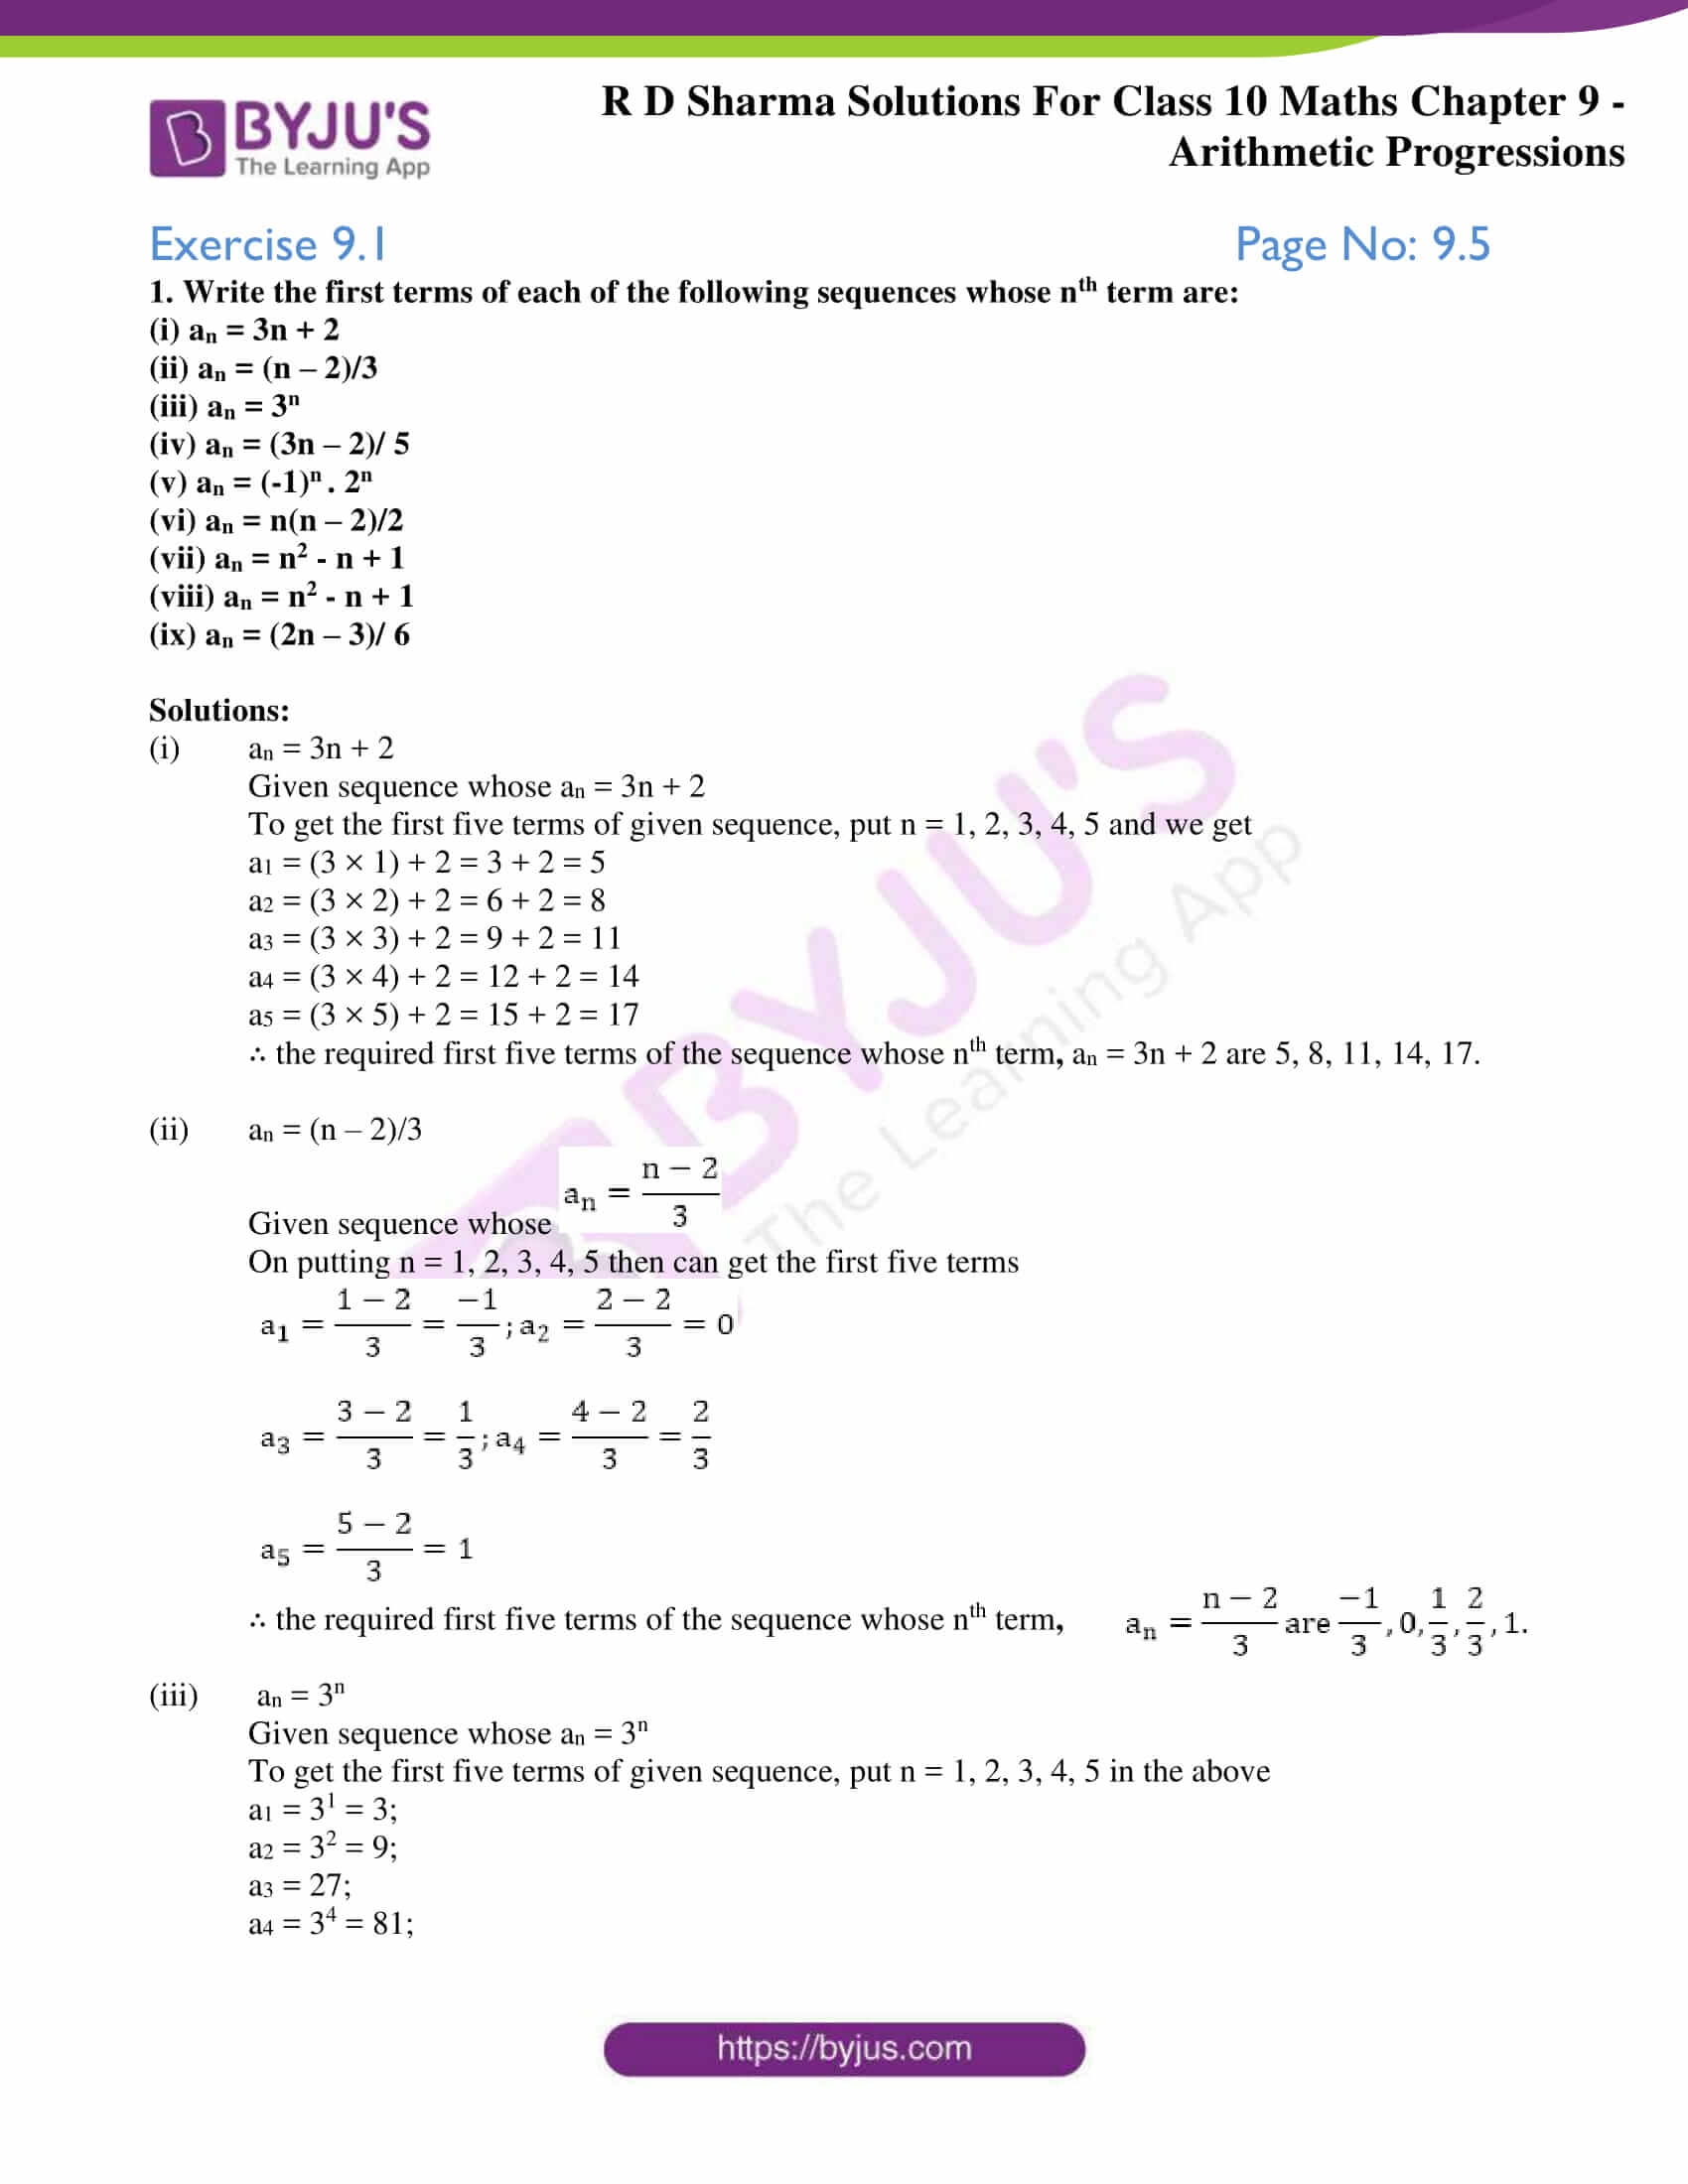 rd-sharma-solutions-for-class-10-maths-updated-for-2022-23-chapter-9-arithmetic-progressions